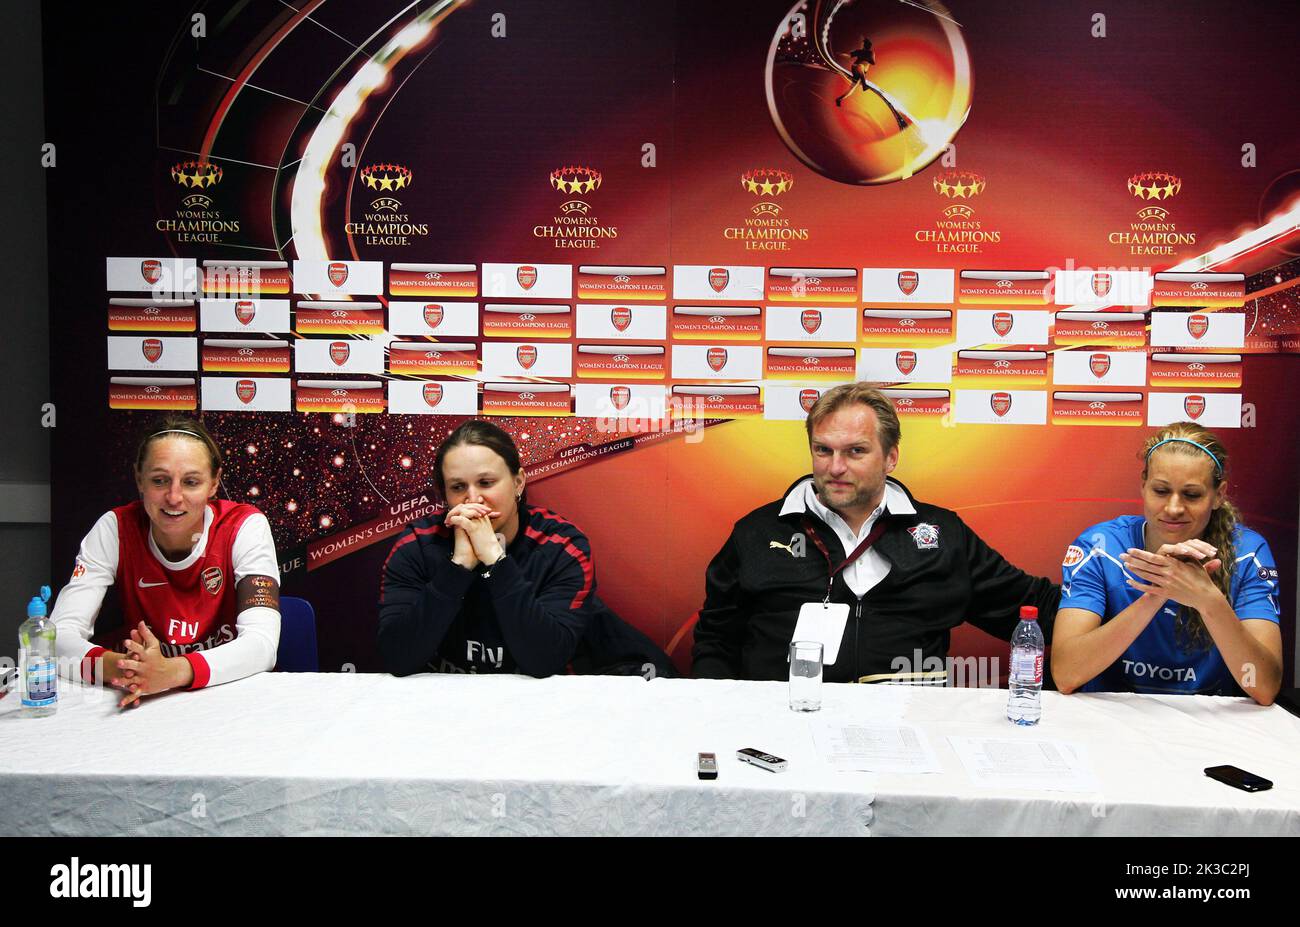 Champions League quarterfinals, Arsenal vs. Linköping football club. Linköping FC took the lead in the Champions League quarter-final against Arsenal at Meadow Park outside London, UK. In the picture: Press conference after the match with players and coaches. Stock Photo